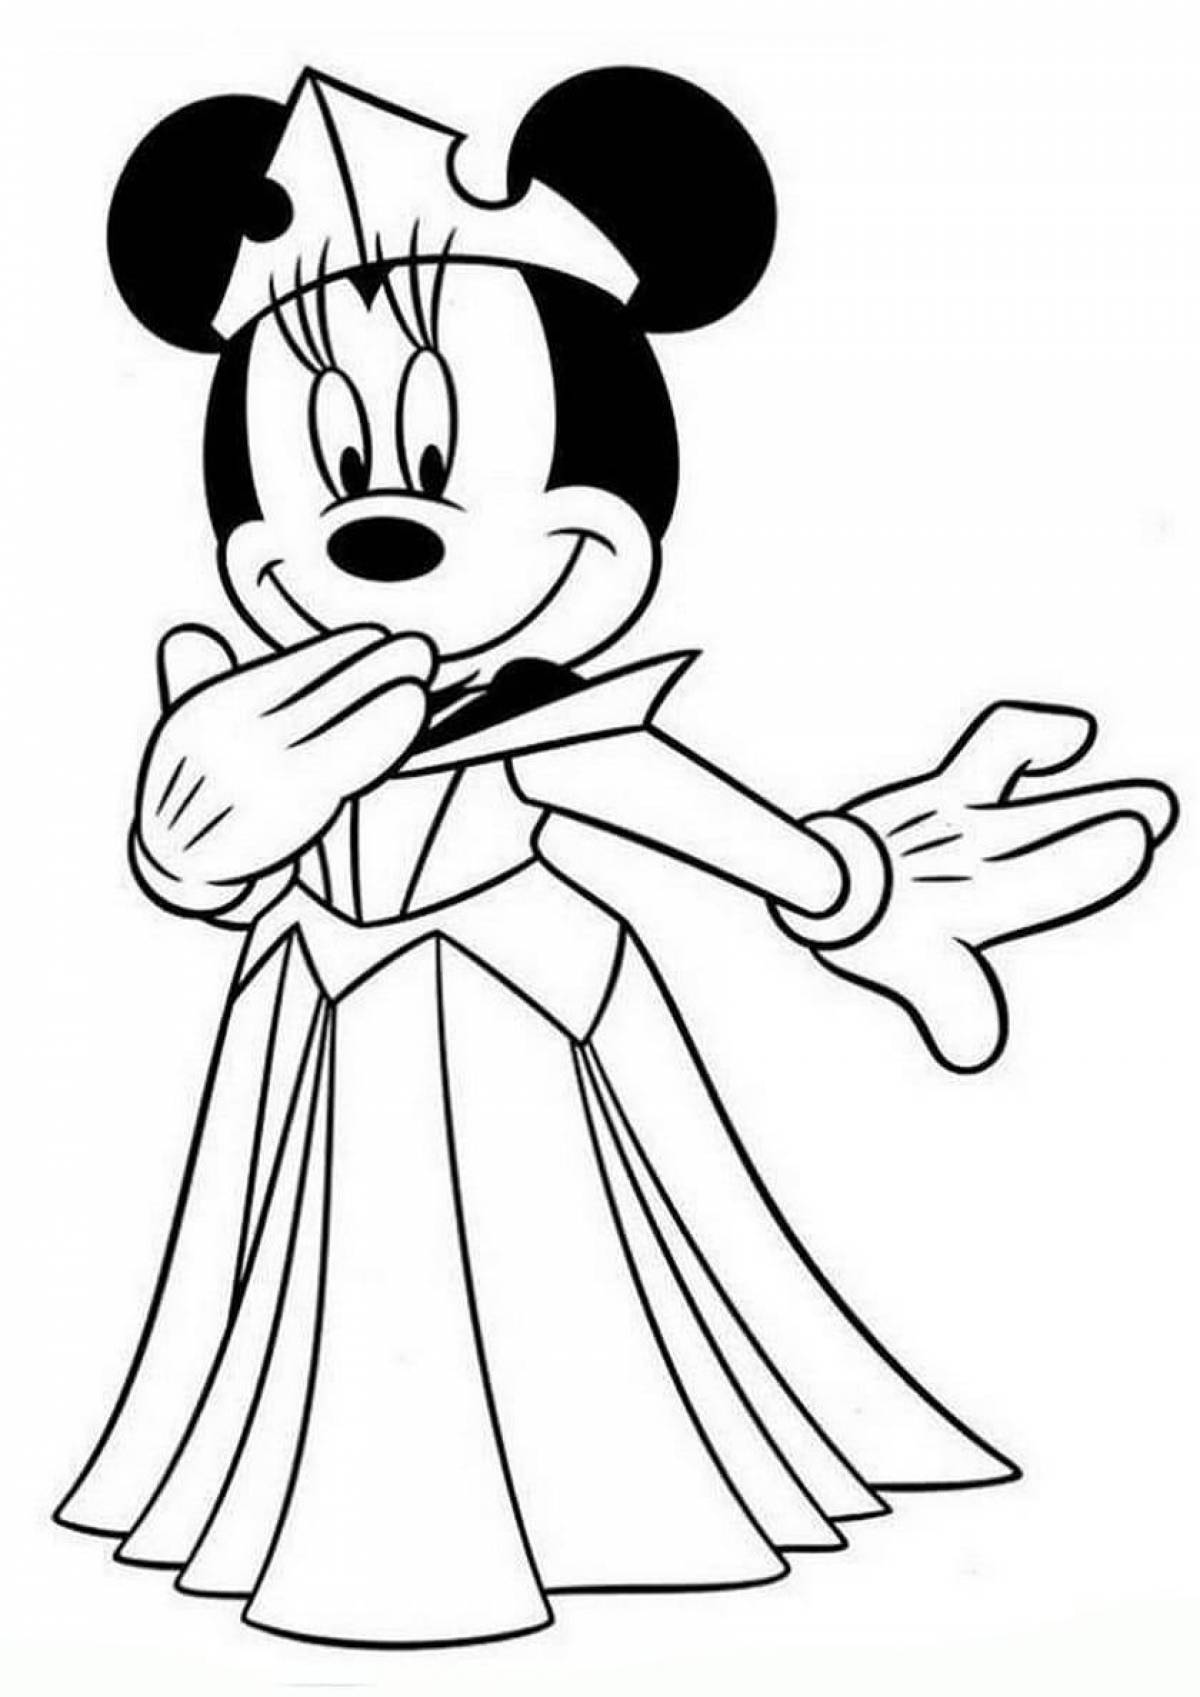 Mickey mouse for girls #6